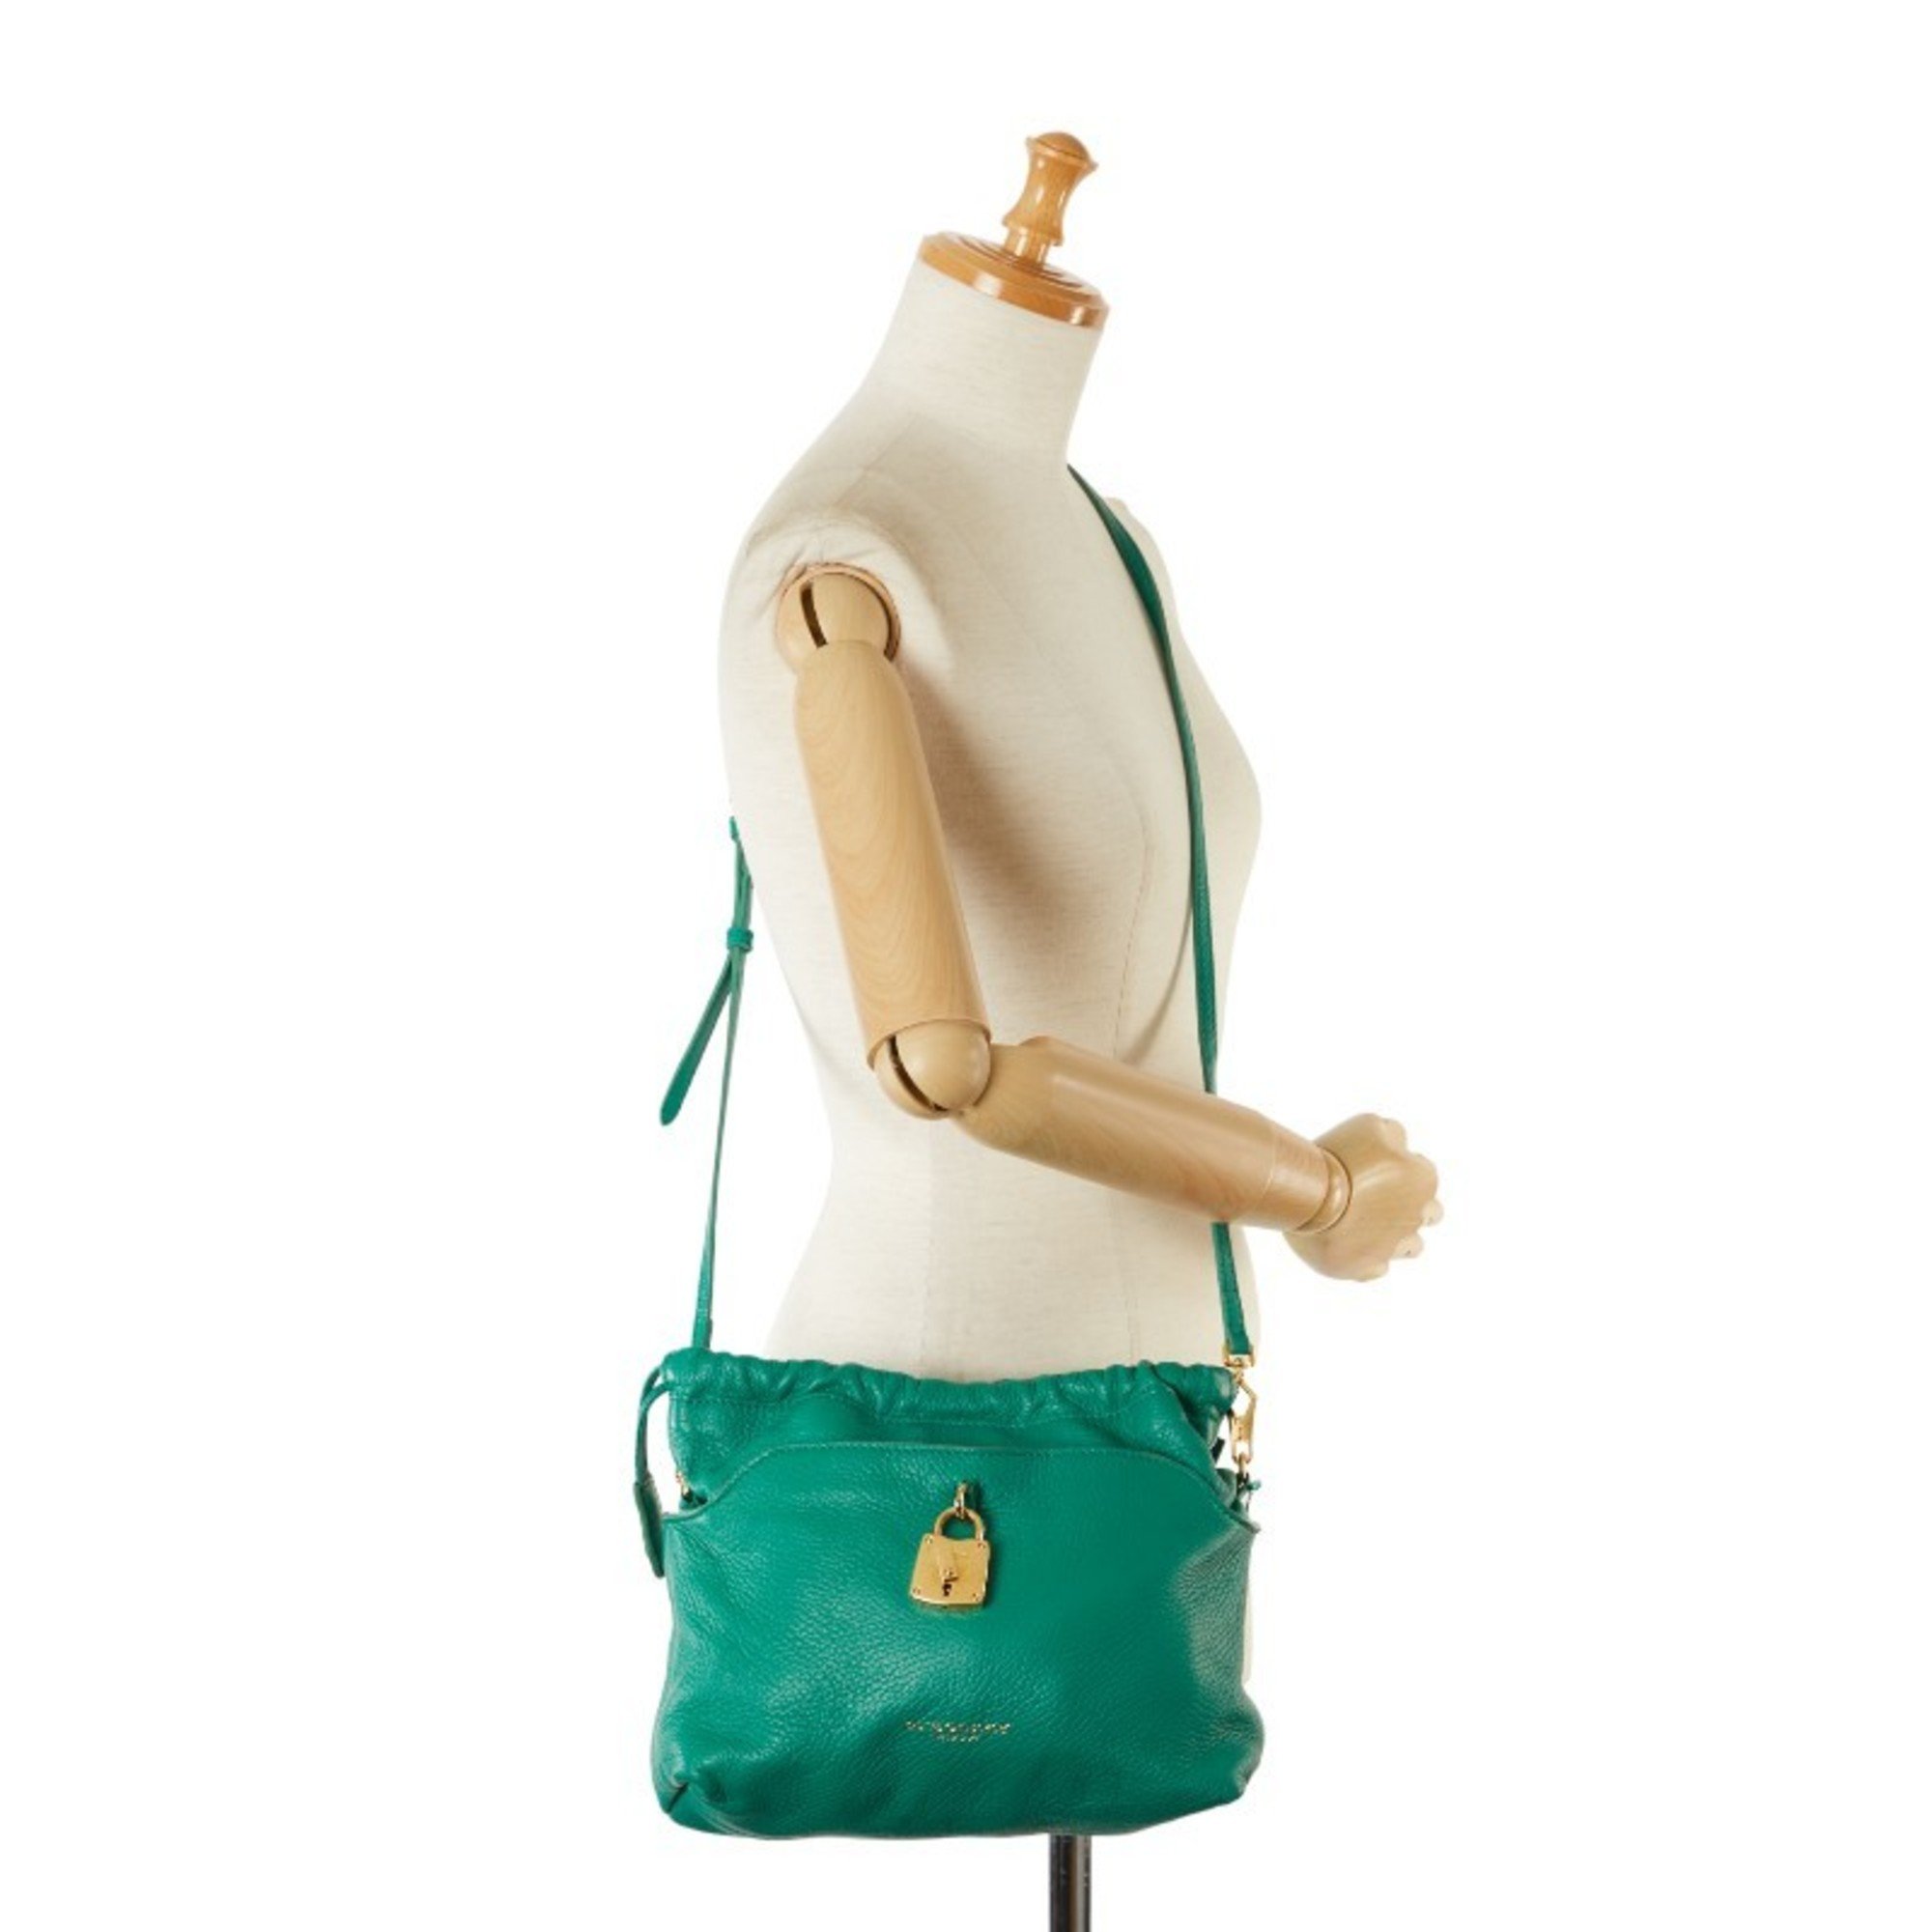 Burberry Shoulder Bag Green Leather Women's BURBERRY